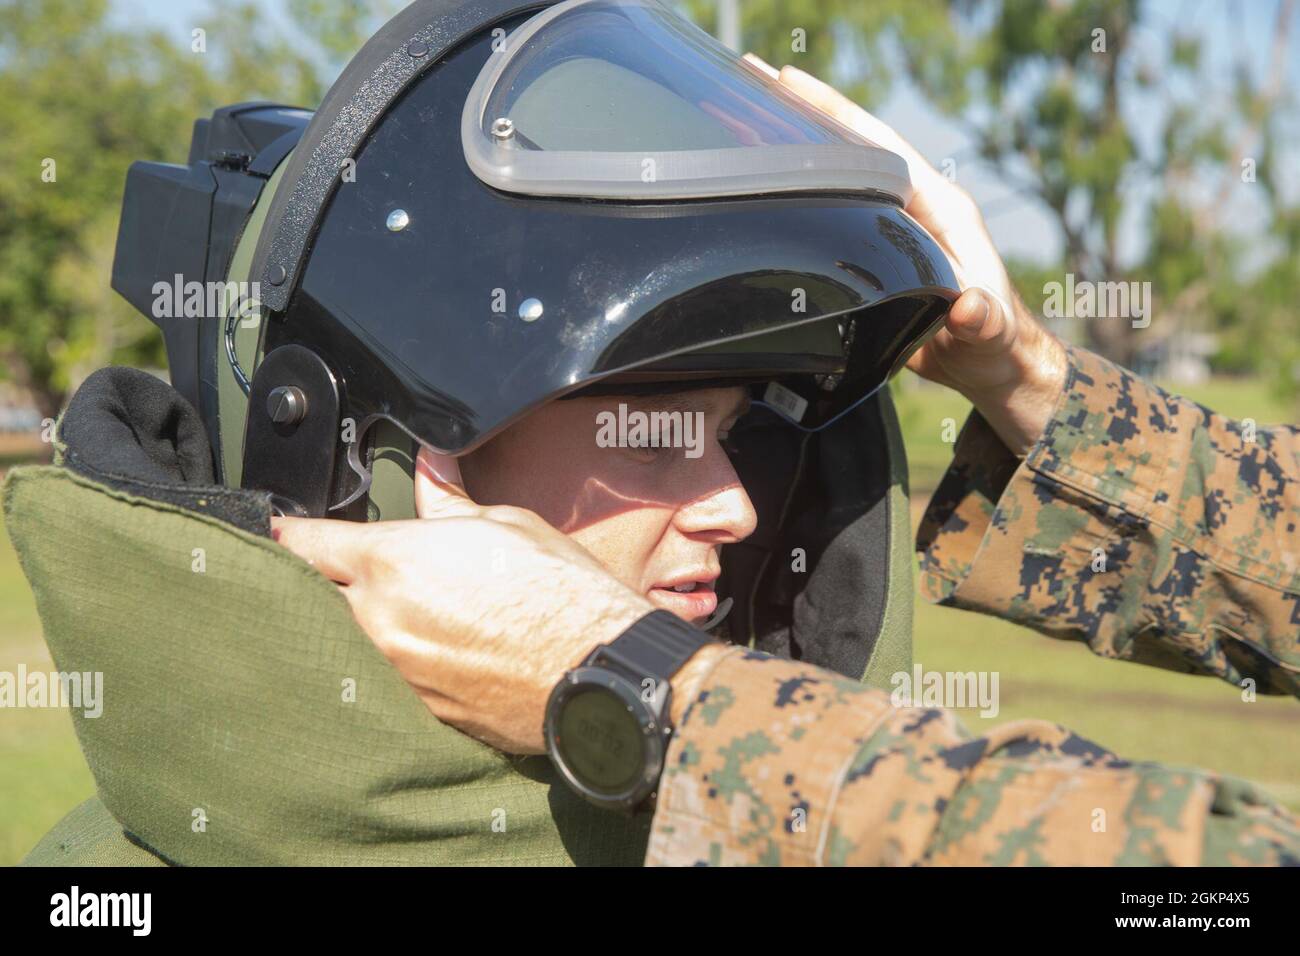 U.S. Marine Corps Sgt. Christian Rutledge, a parachute rigger with Marine Rotational Force - Darwin, receives operating instructions for a blast resistant helmet during an Explosive Ordnance Disposal lateral move screener at Robertson Barracks, Darwin, NT, Australia, June 10, 2021. The screener consisted of bomb suit training, ordinance identification, and rope techniques. Stock Photo